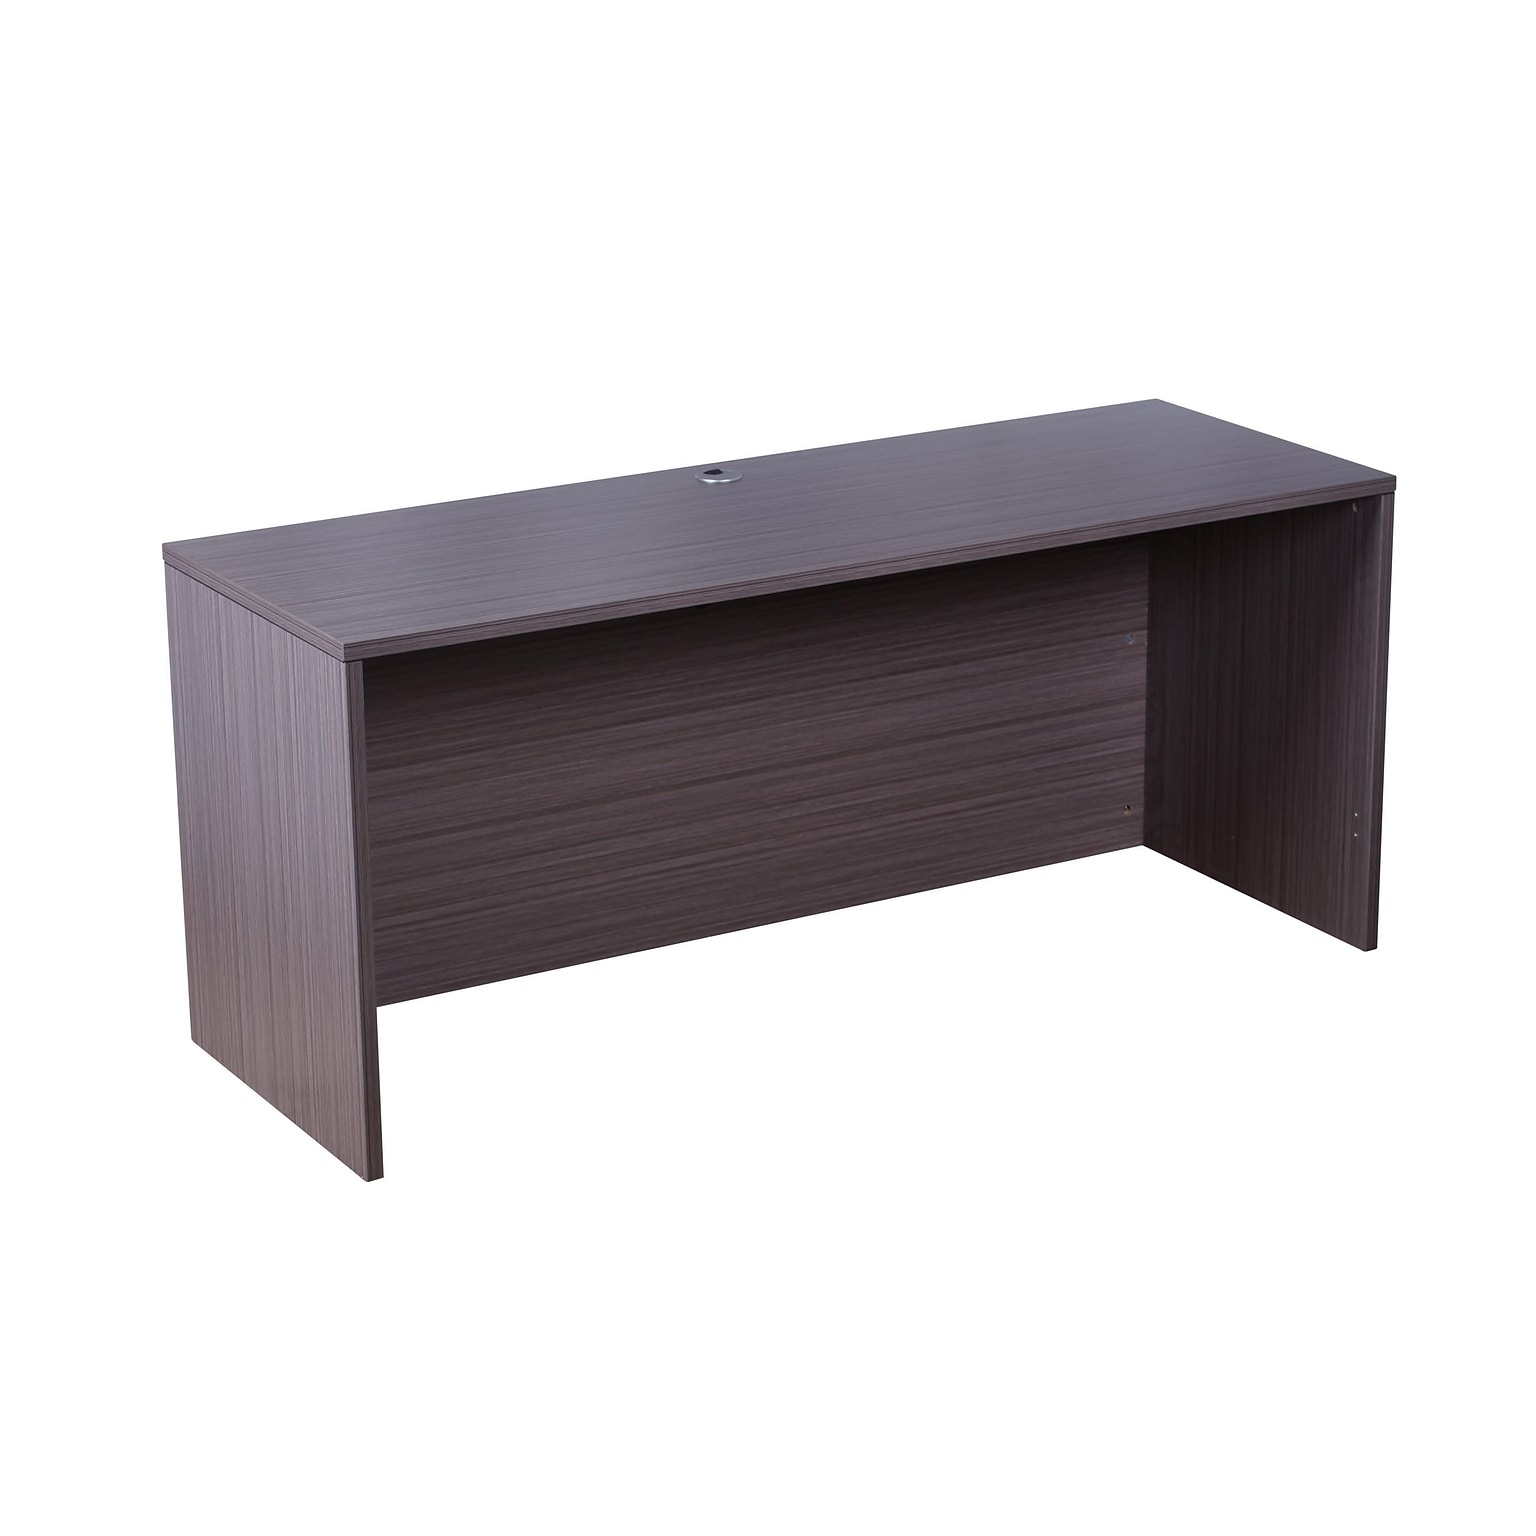 Boss® Laminate Collection in Driftwood Finish, 66 Credenza